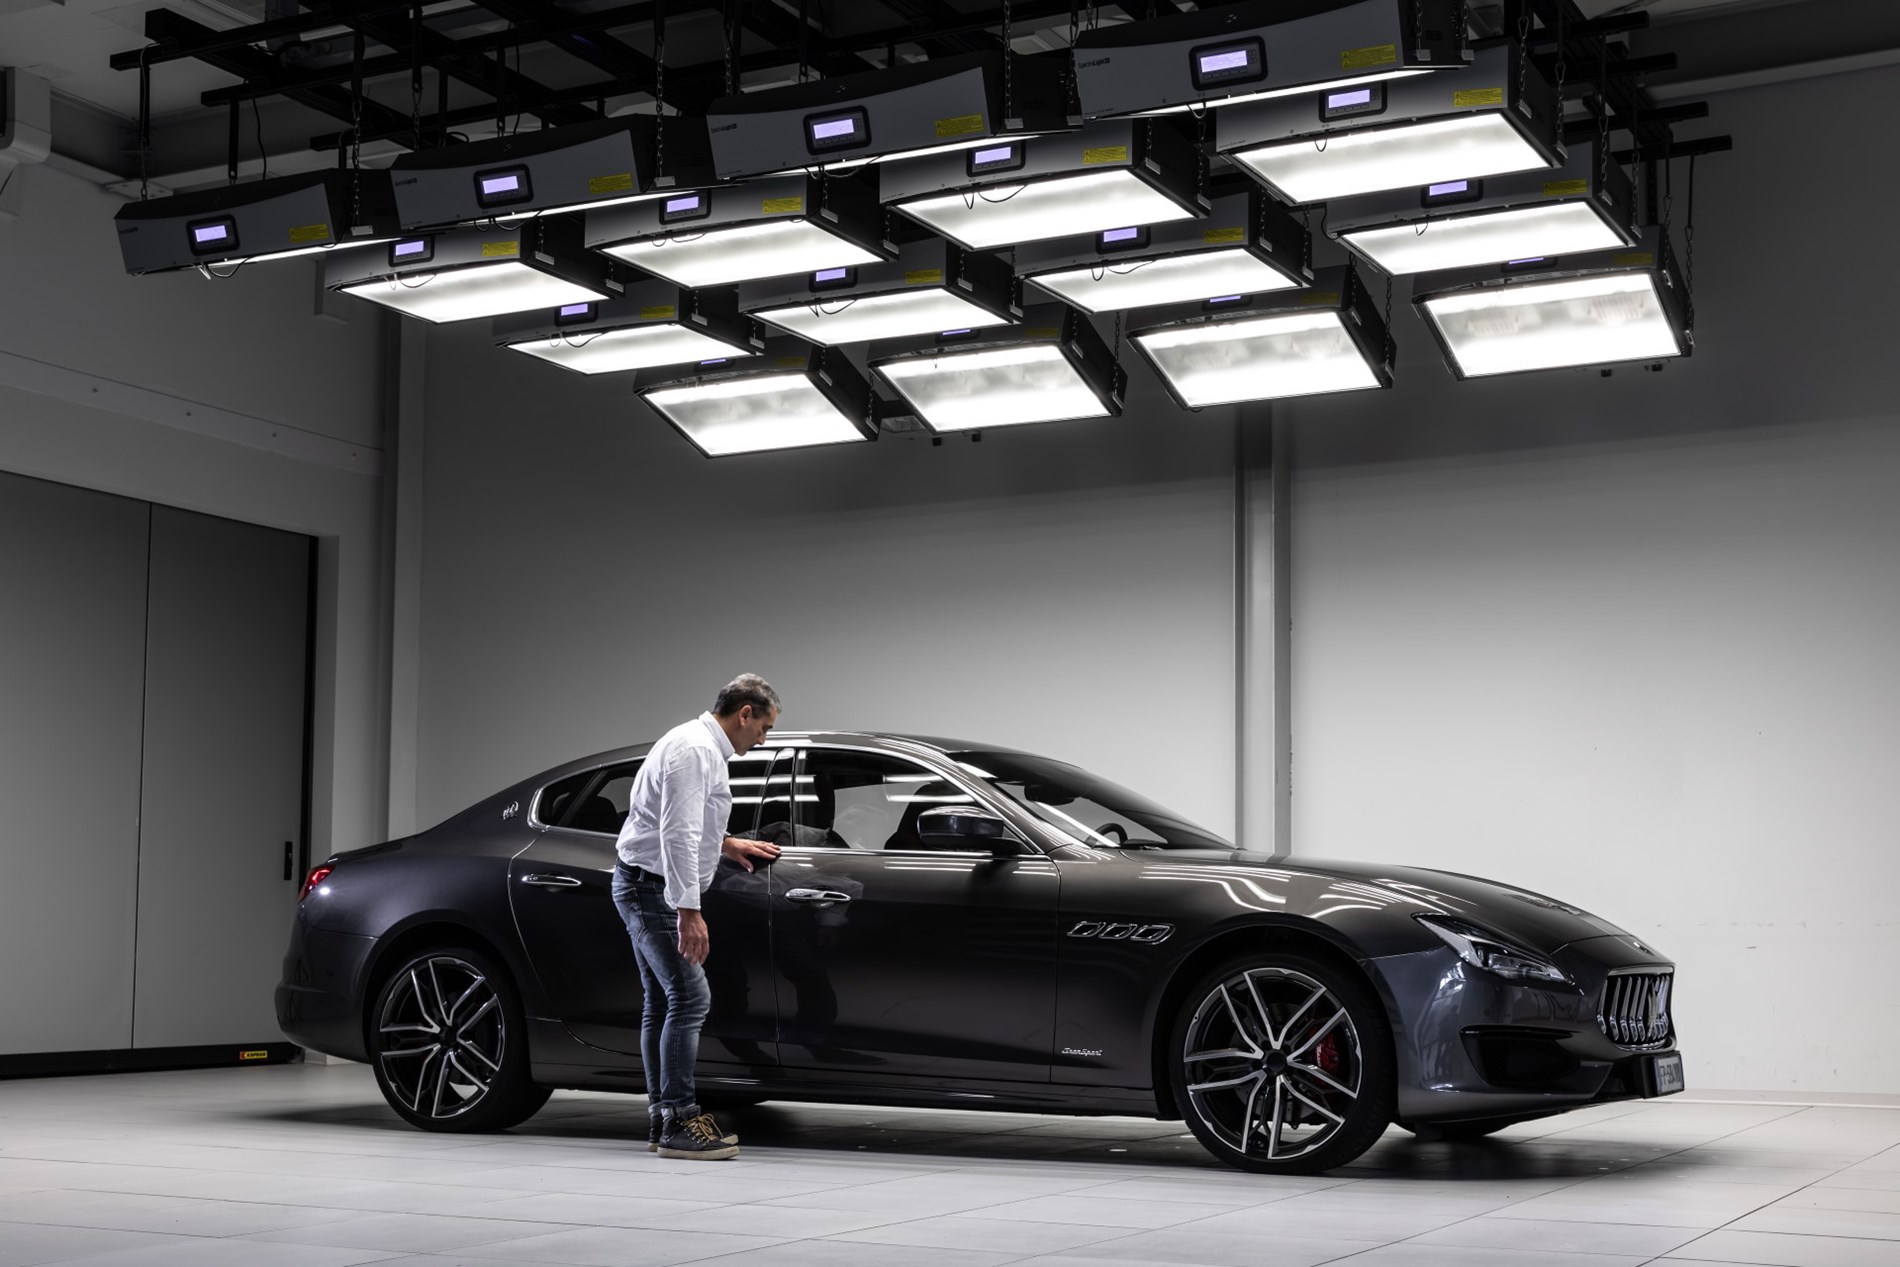 Maserati opens the doors to its Innovation Lab